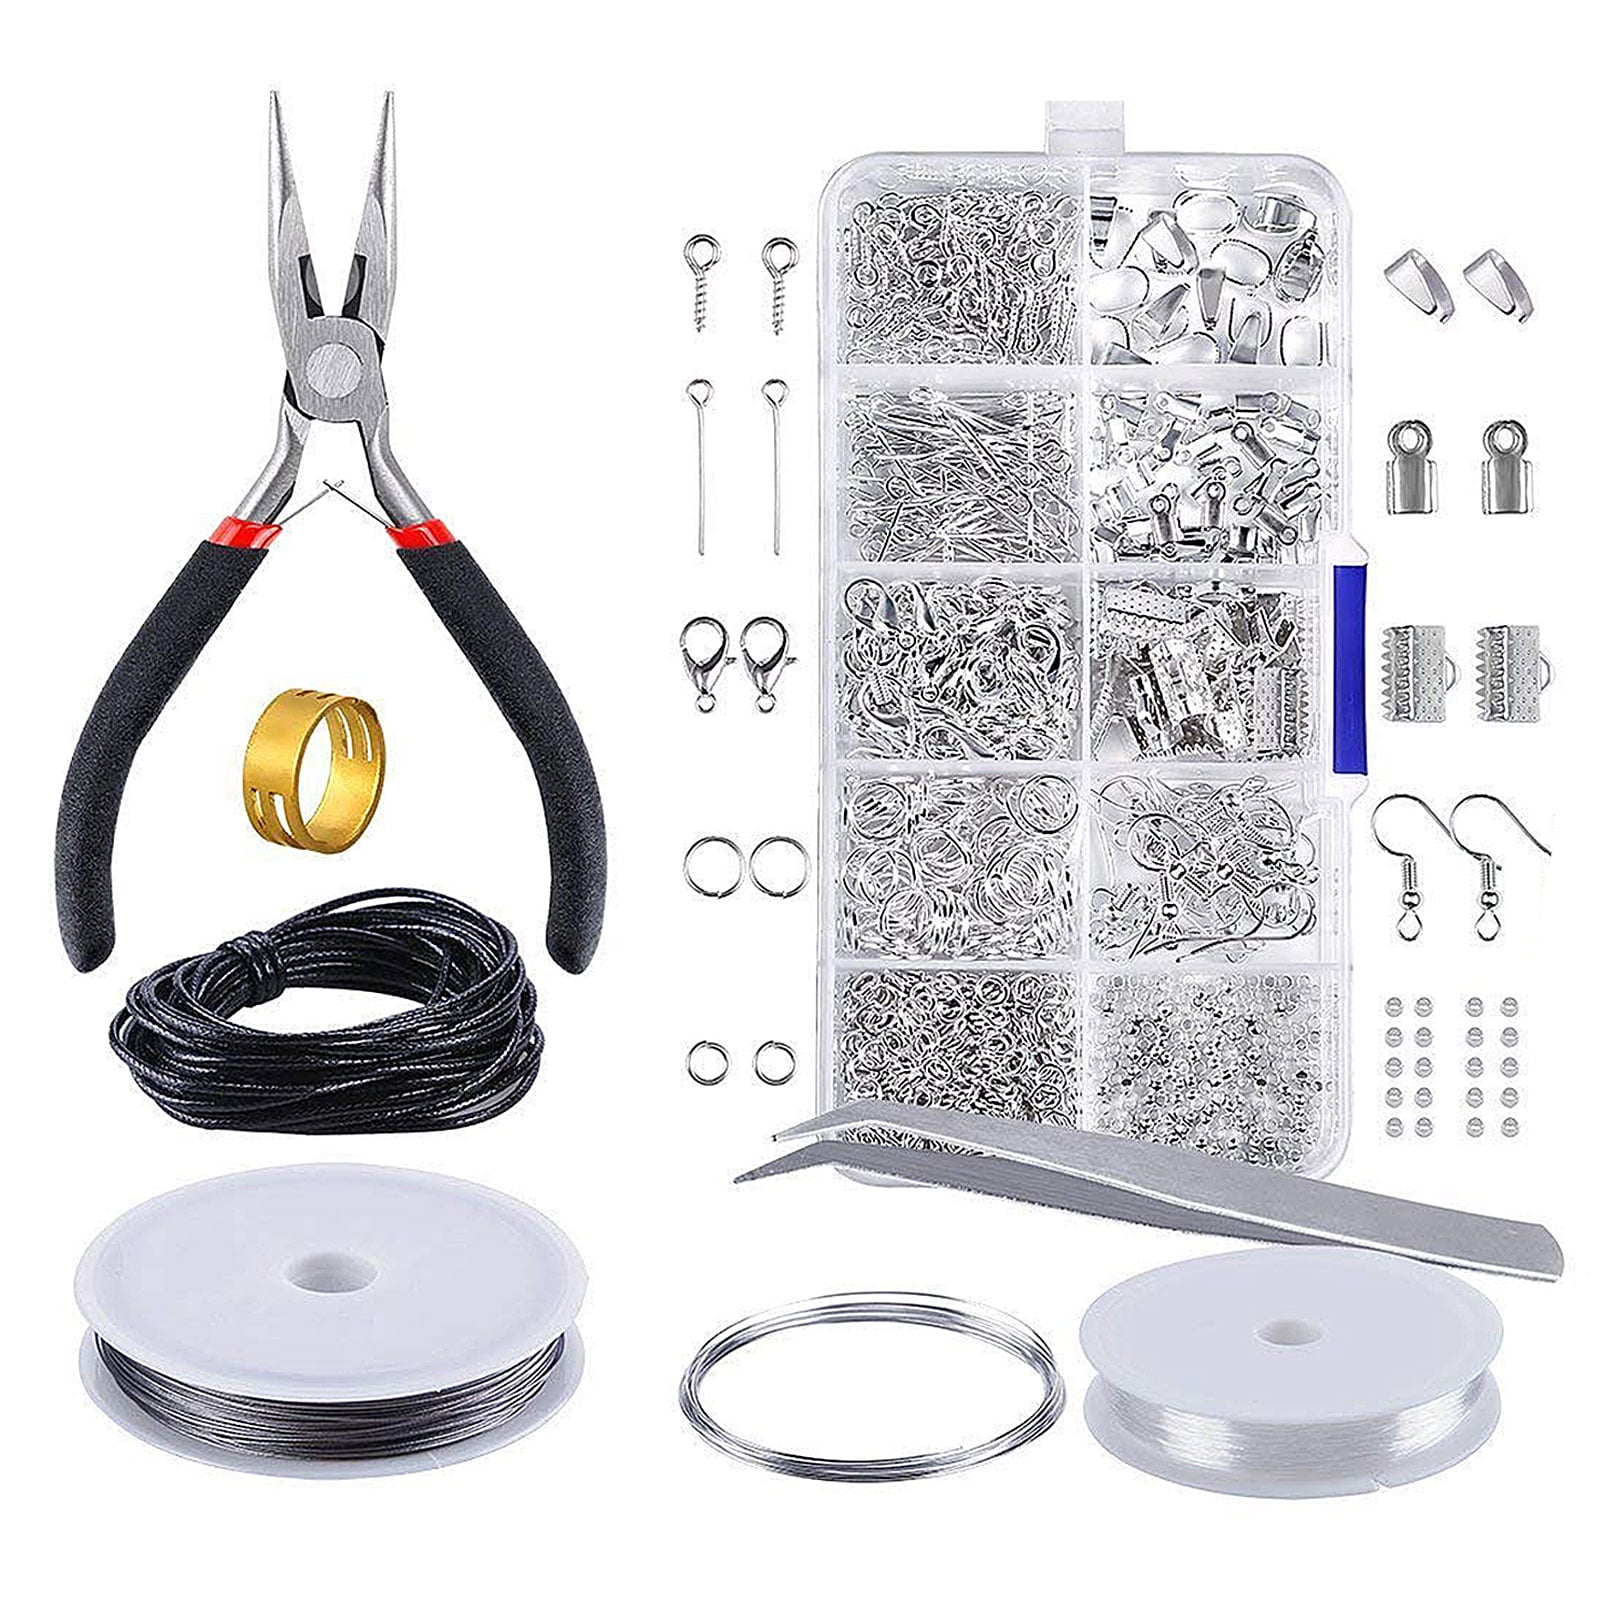 DIY Large Jewellery Making Kit Findings Set Pliers Beads Wire Starter Tools 